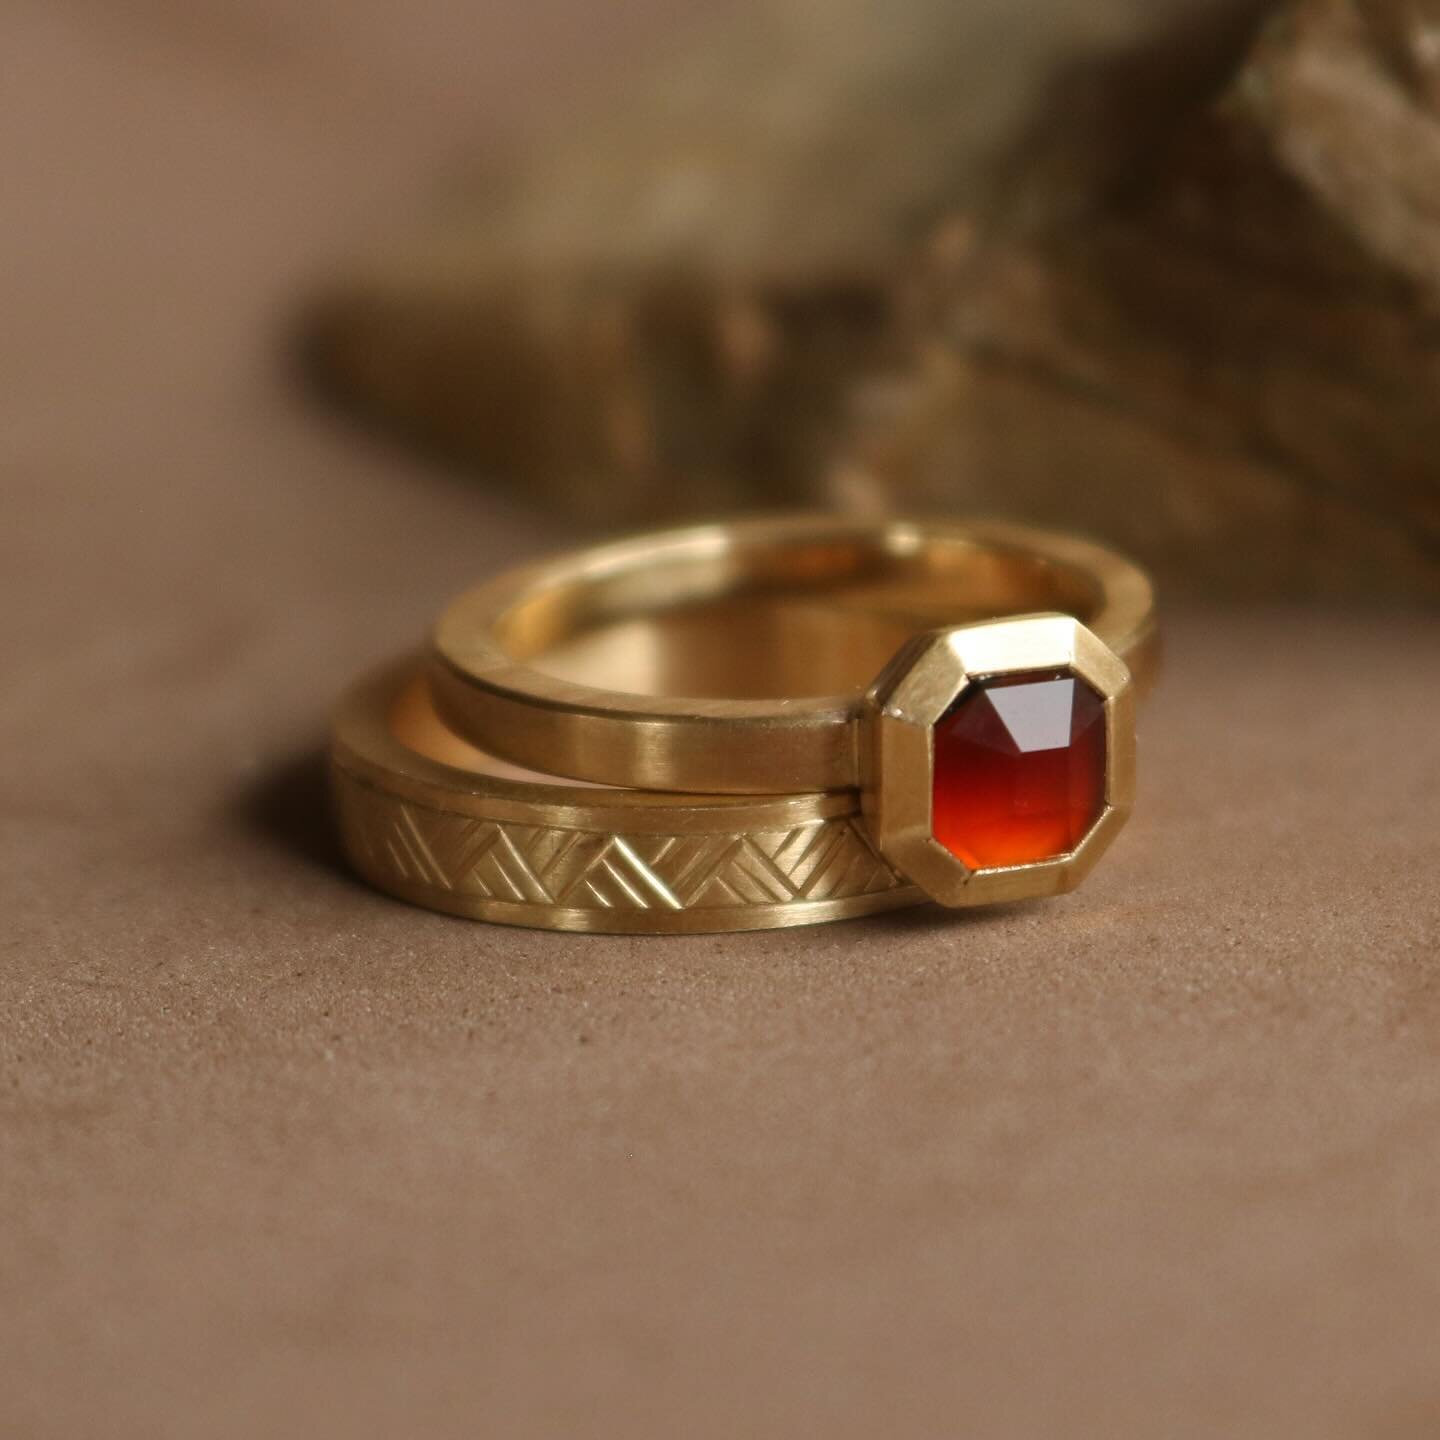 A couple of my favourite pieces from my upcoming Ceremonial Ring Release in a couple of weeks.
Octagon Coromandel Carnelian in 9ct gold and a hand engraved raranga/weaving ring also in 9ct gold. 
These won&rsquo;t be sold together but they look might